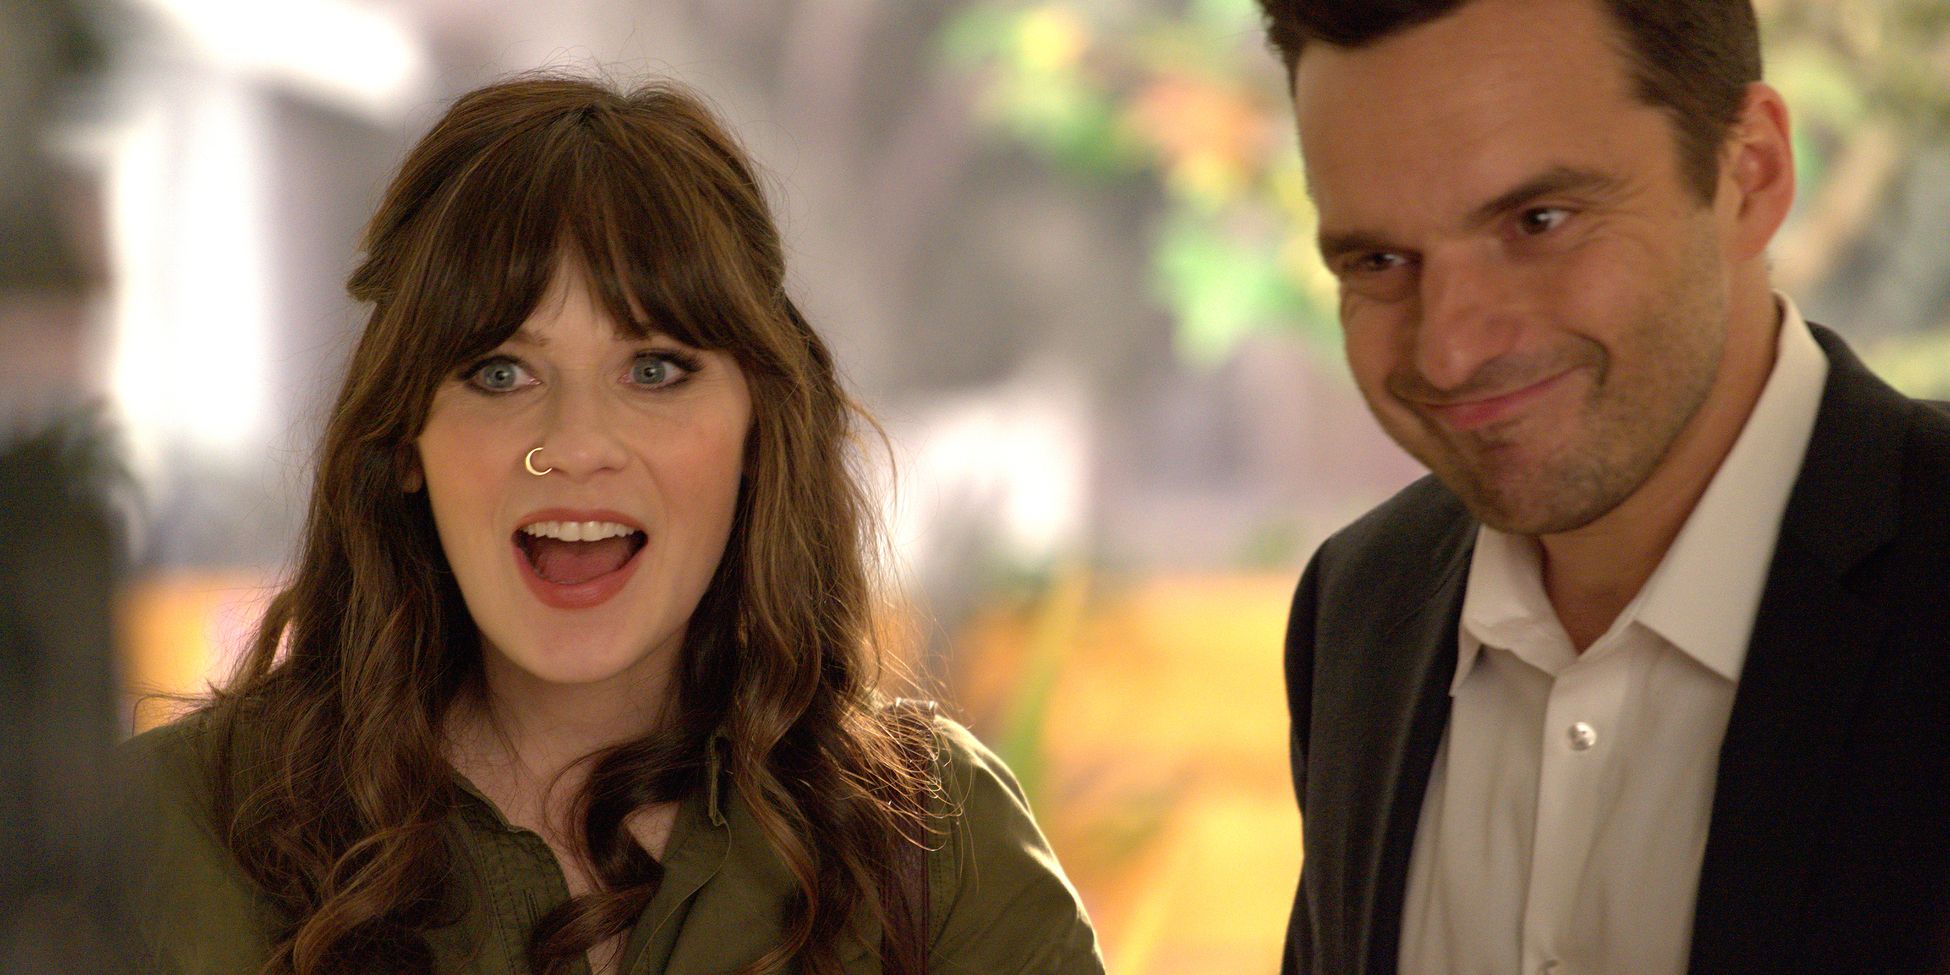 FOX’s New Girl embarks on its final season with a string of steadily funny episodes that finally bring its characters into the next phase of their lives.